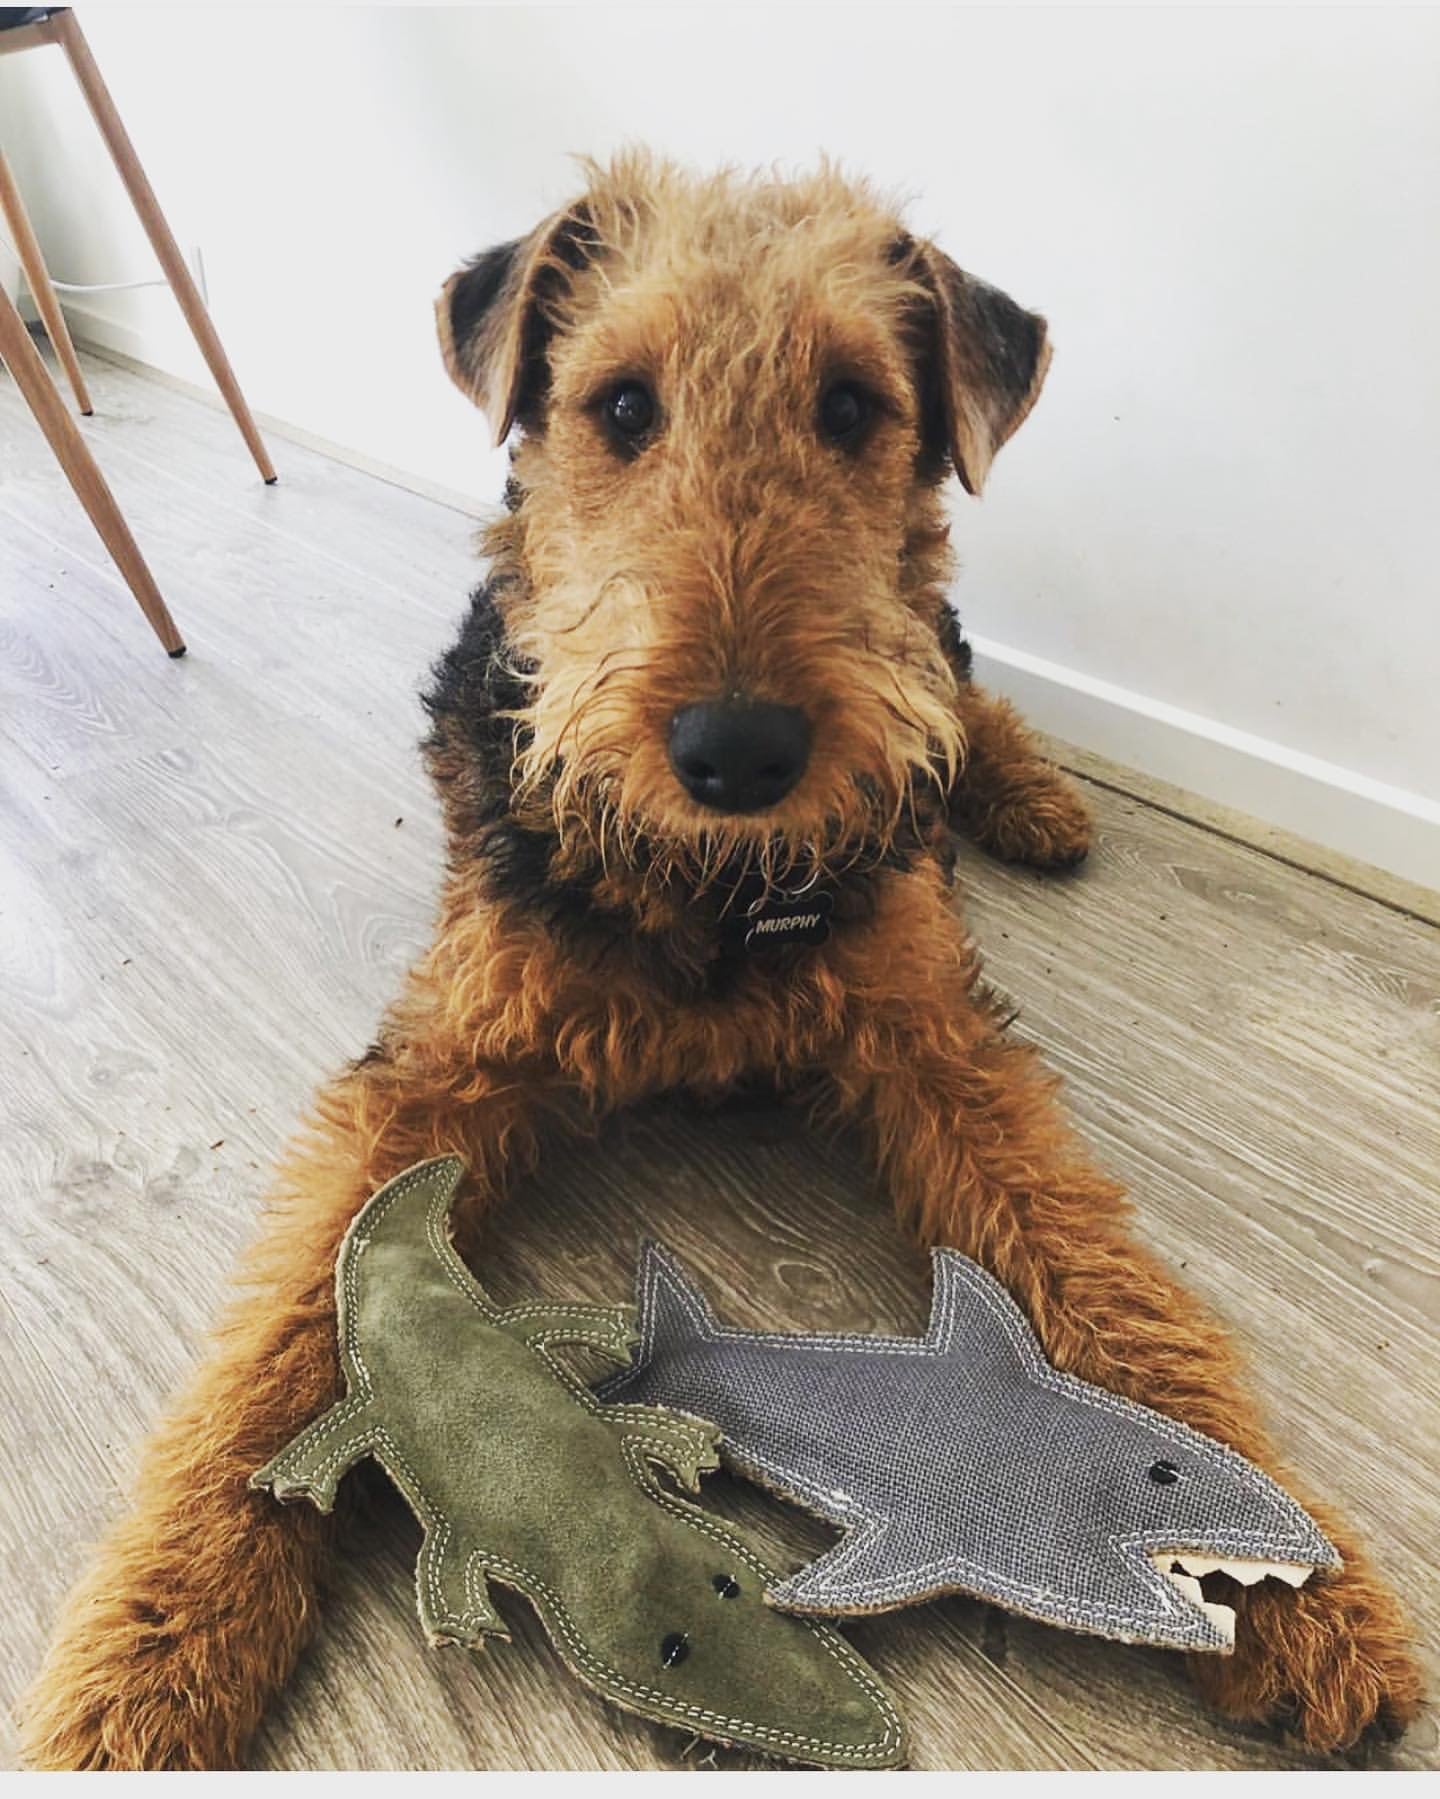 Fluffy dog sitting on the ground with 2 dog toys in front of him. One is Shazza the shark the other is Steve the croc. Both dog toys are by outback tails.